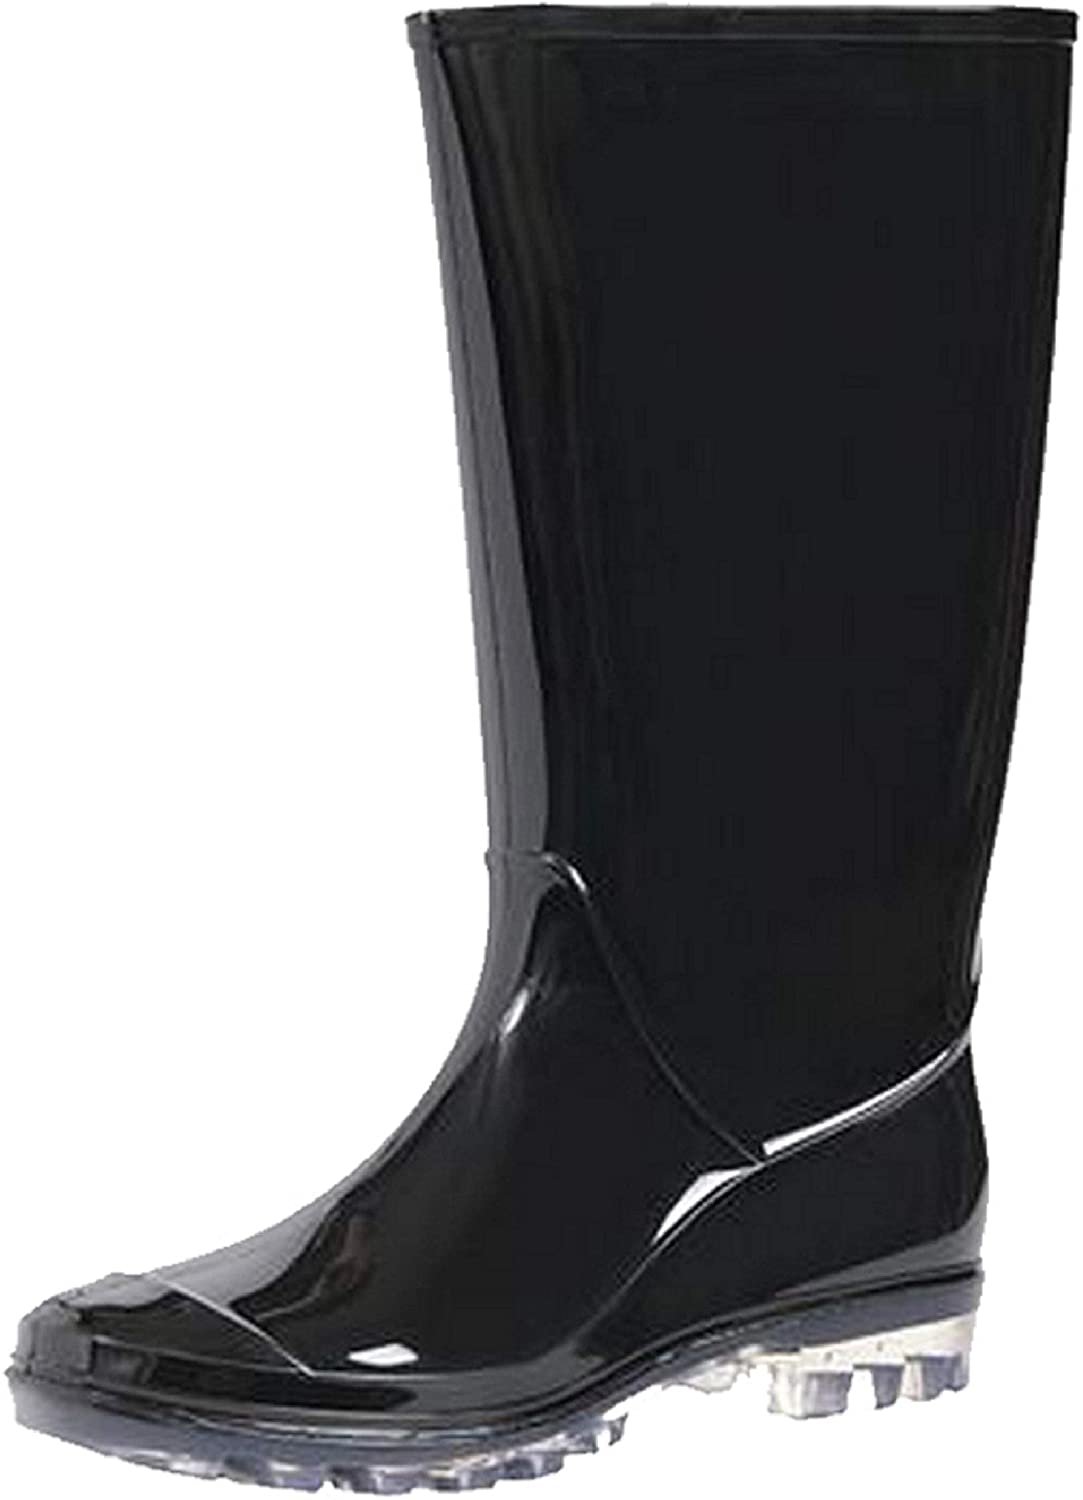 Womens+Black+Rubber+Rain+BOOTS+Wide+Calf+Waterproof+and+Clear+Sole%2F ...